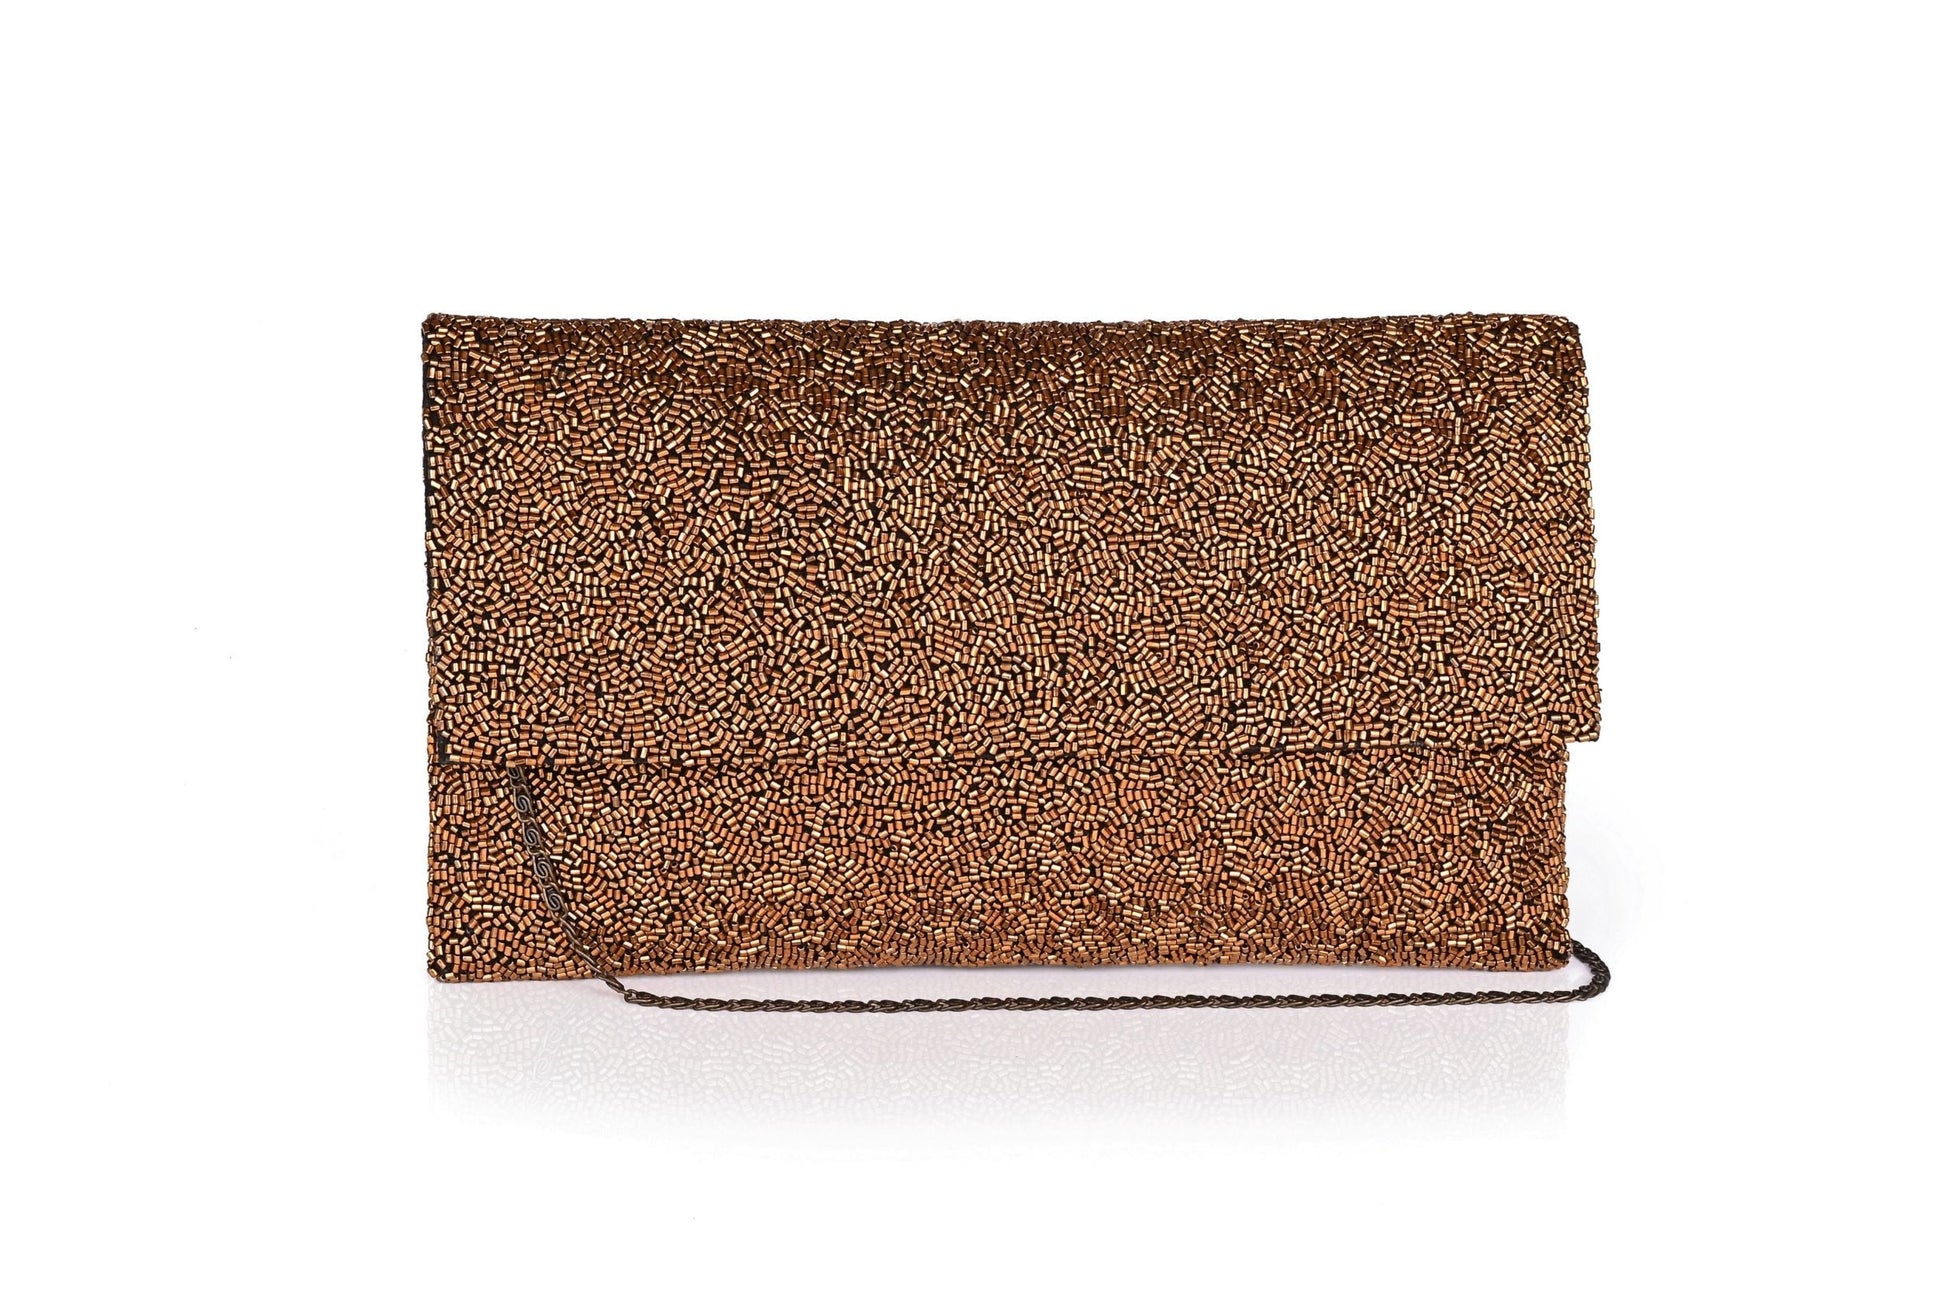 Copper Cupid Clutch - Simply Clutched